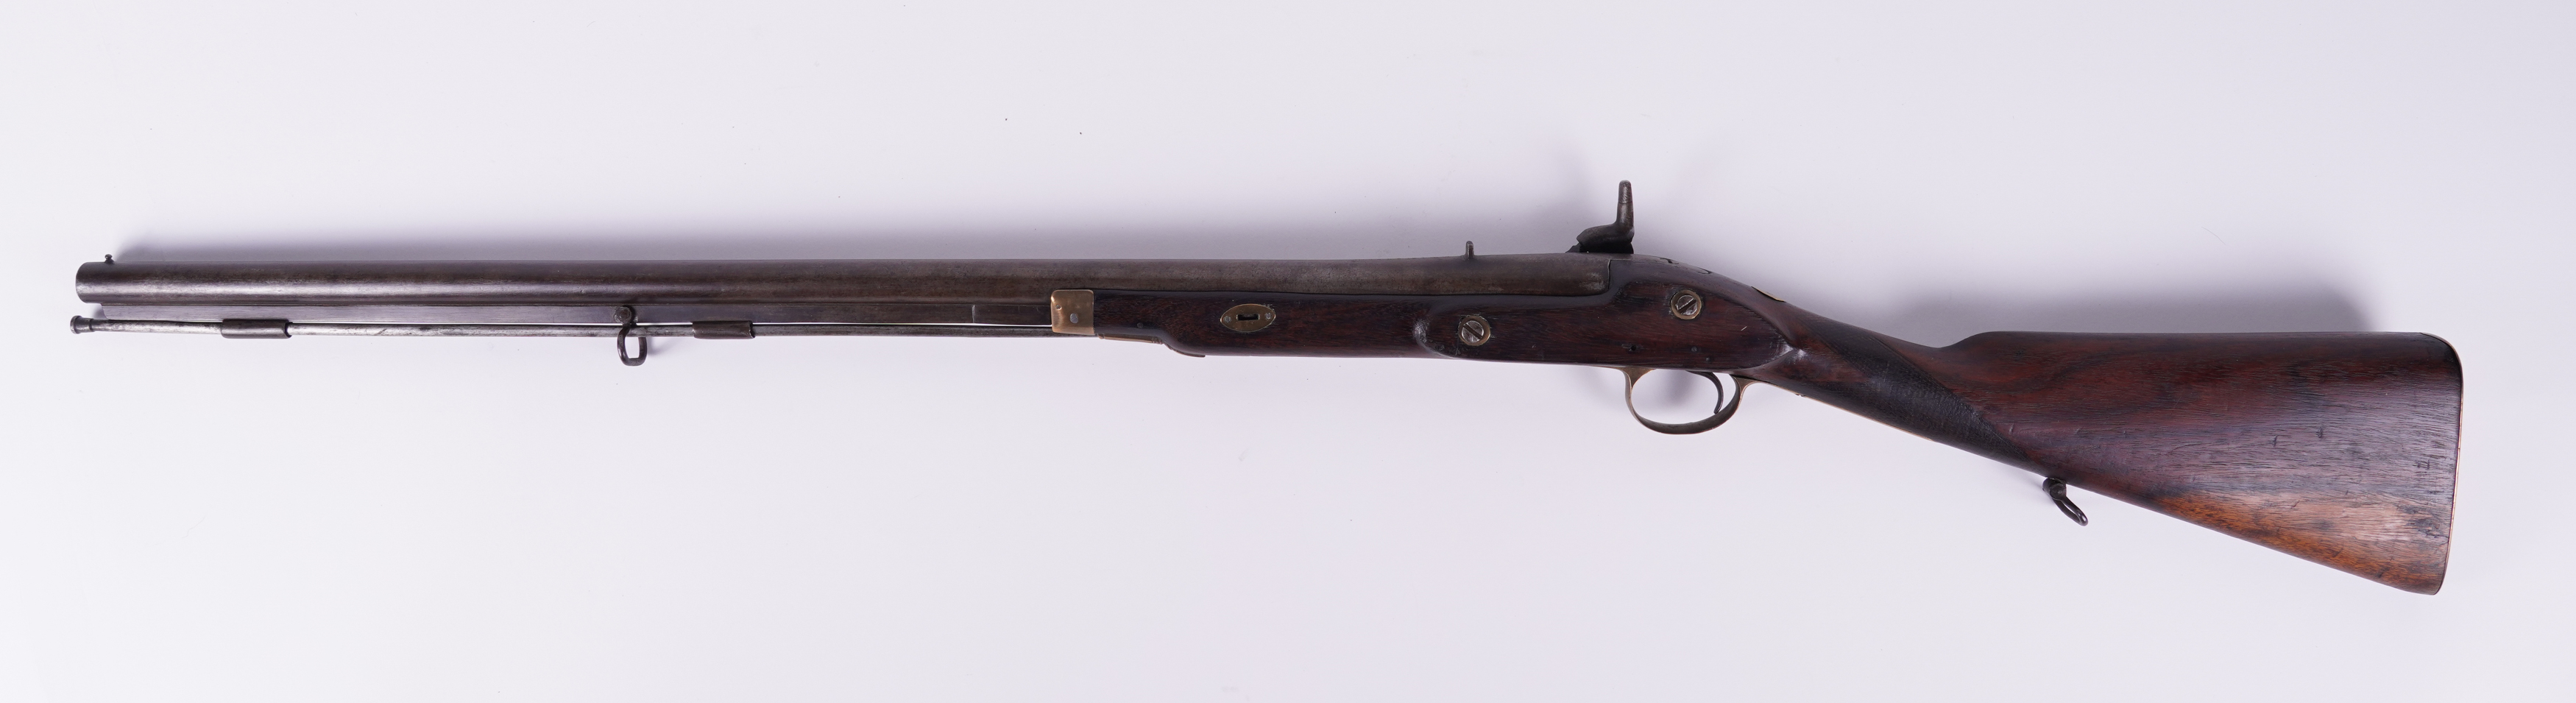 A PERCUSSION ACTION RIFLE - Image 3 of 3